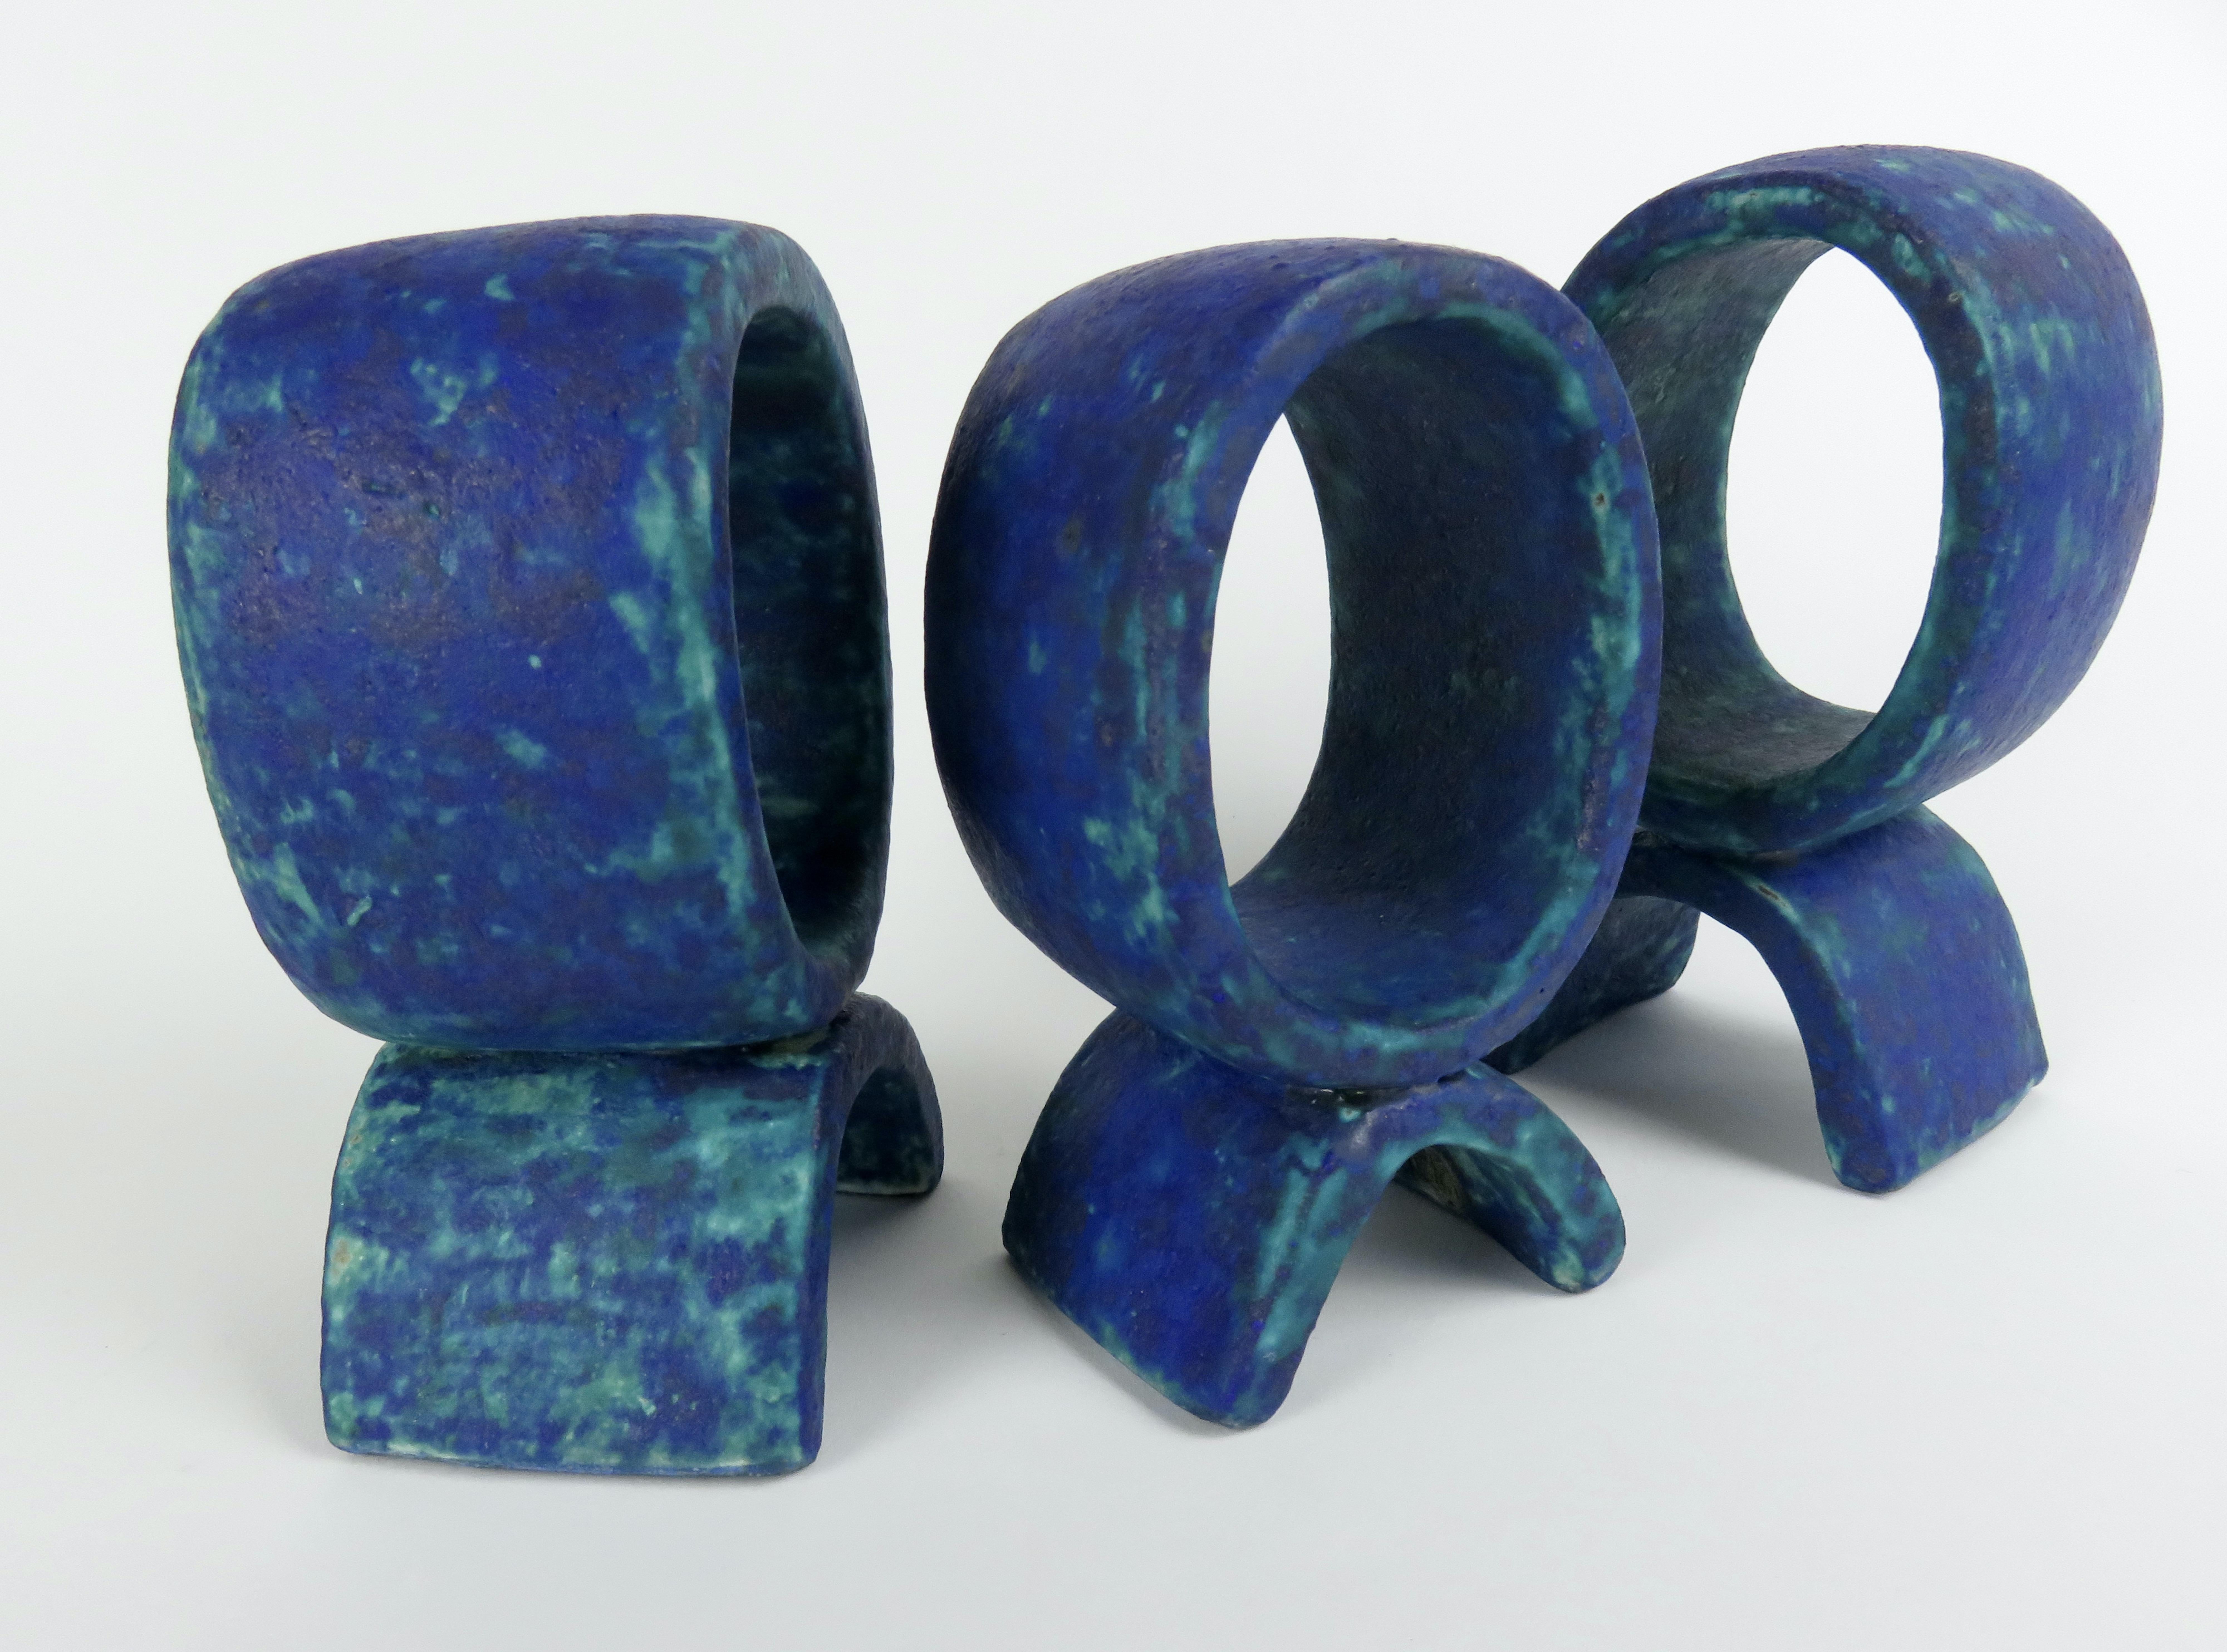 Mottled Turquoise and Deep Blue, 3 Ceramic Totems, Single Rings on Curved Legs For Sale 2